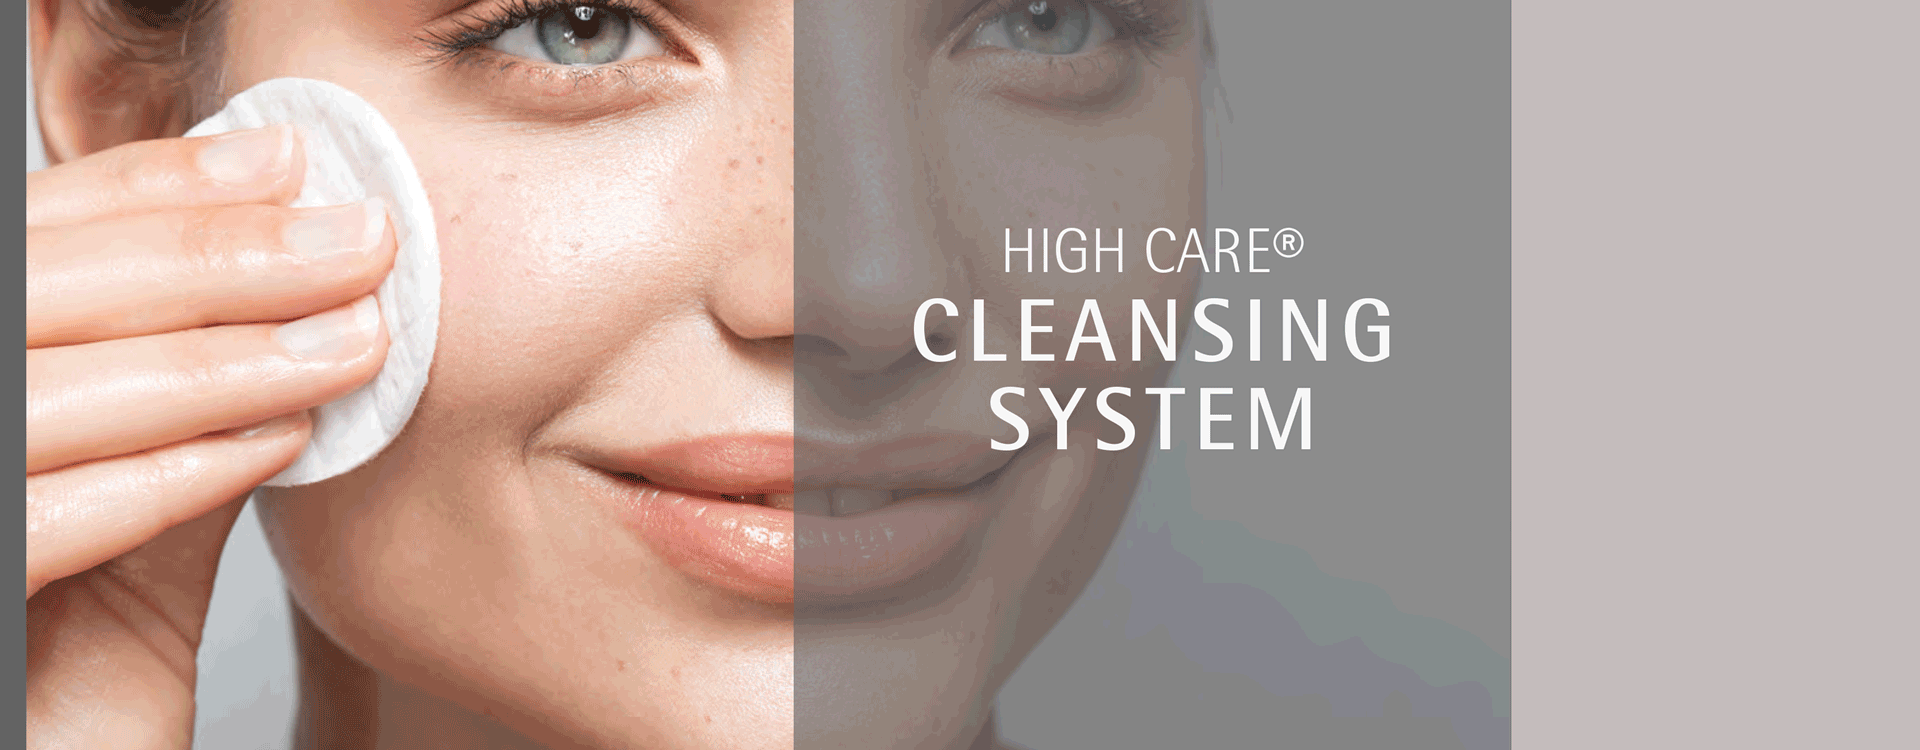 Cleansing System